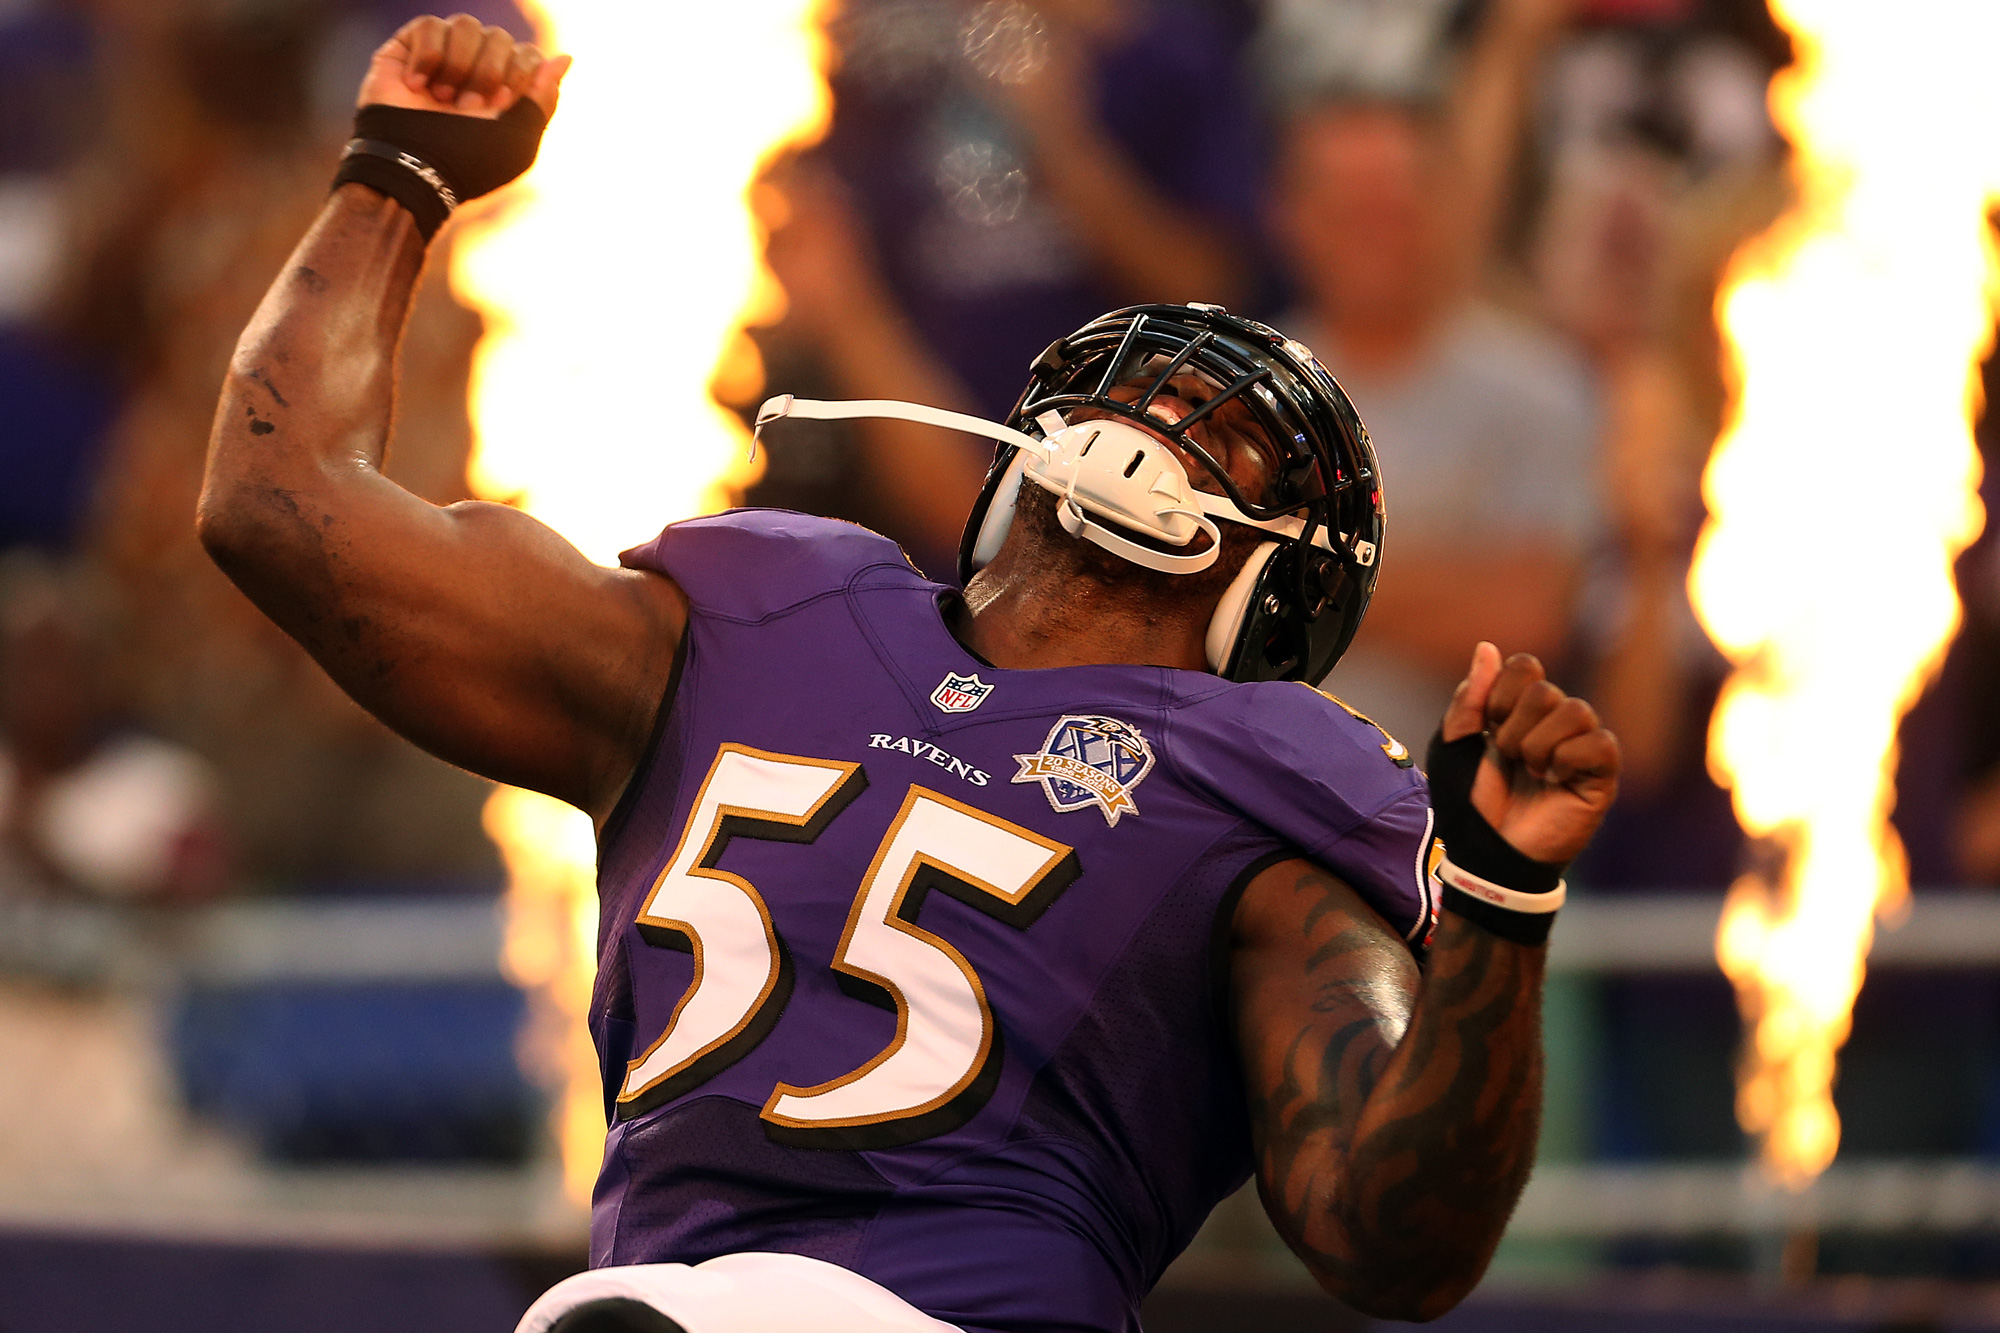  Outside linebacker Terrell Suggs #55 of the Baltimore Ravens is introduced prior to the start of a preseason game against the Washington Redskins at M&amp;T Bank Stadium on August 29, 2015 in Baltimore, Maryland. 